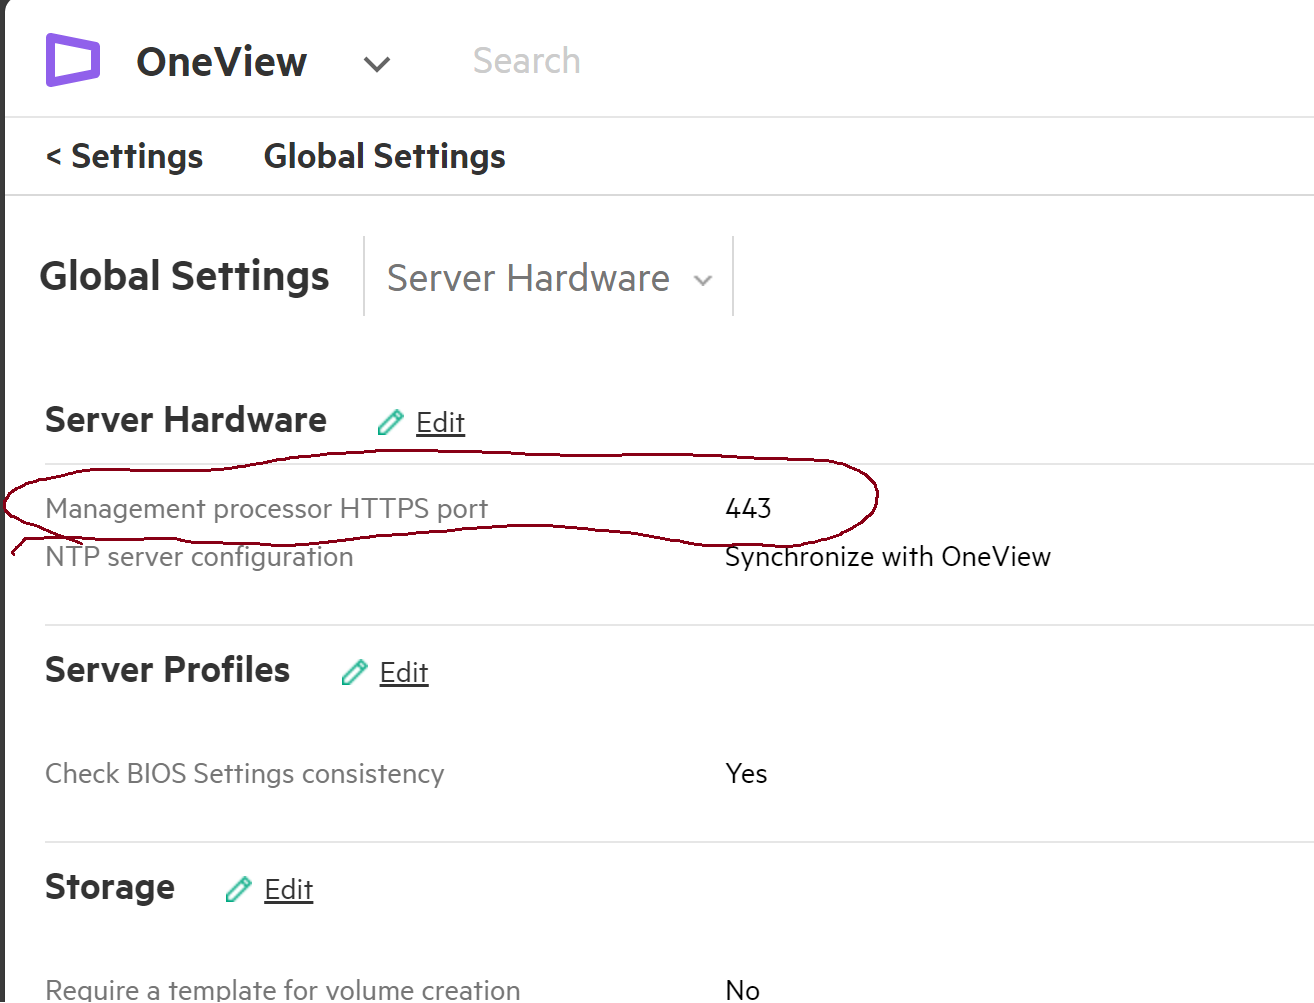 Change Management Processor HTTPS Port in OneView.png